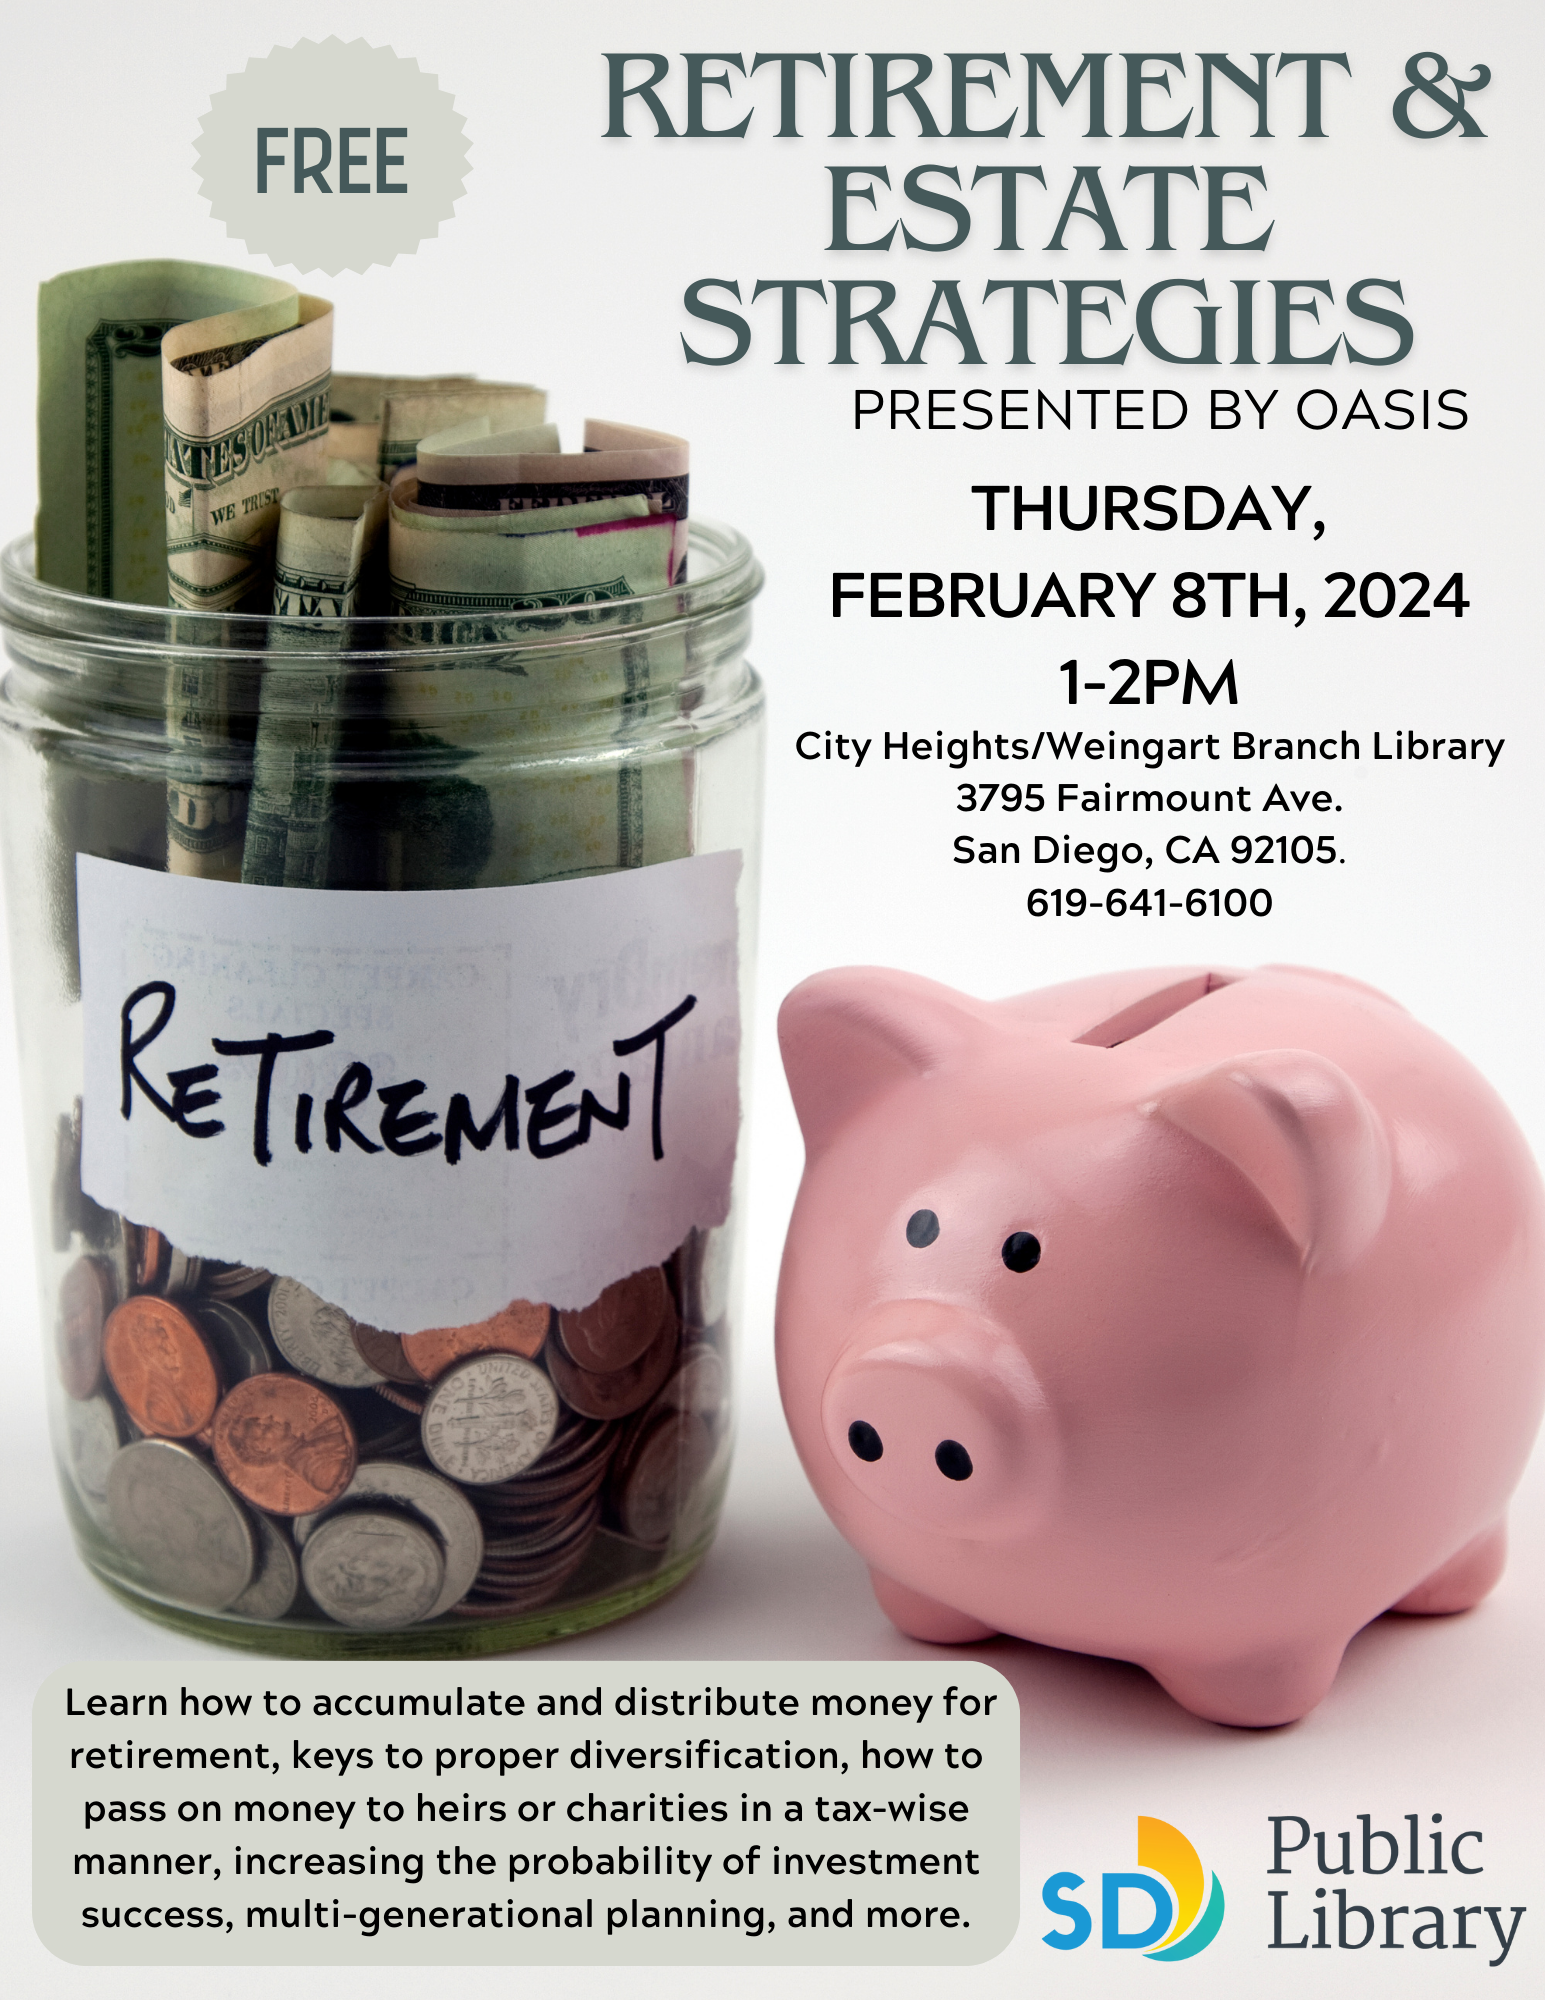 Retirement and Estate Strategies by OASIS. February 8th, 2024,1-2pm.